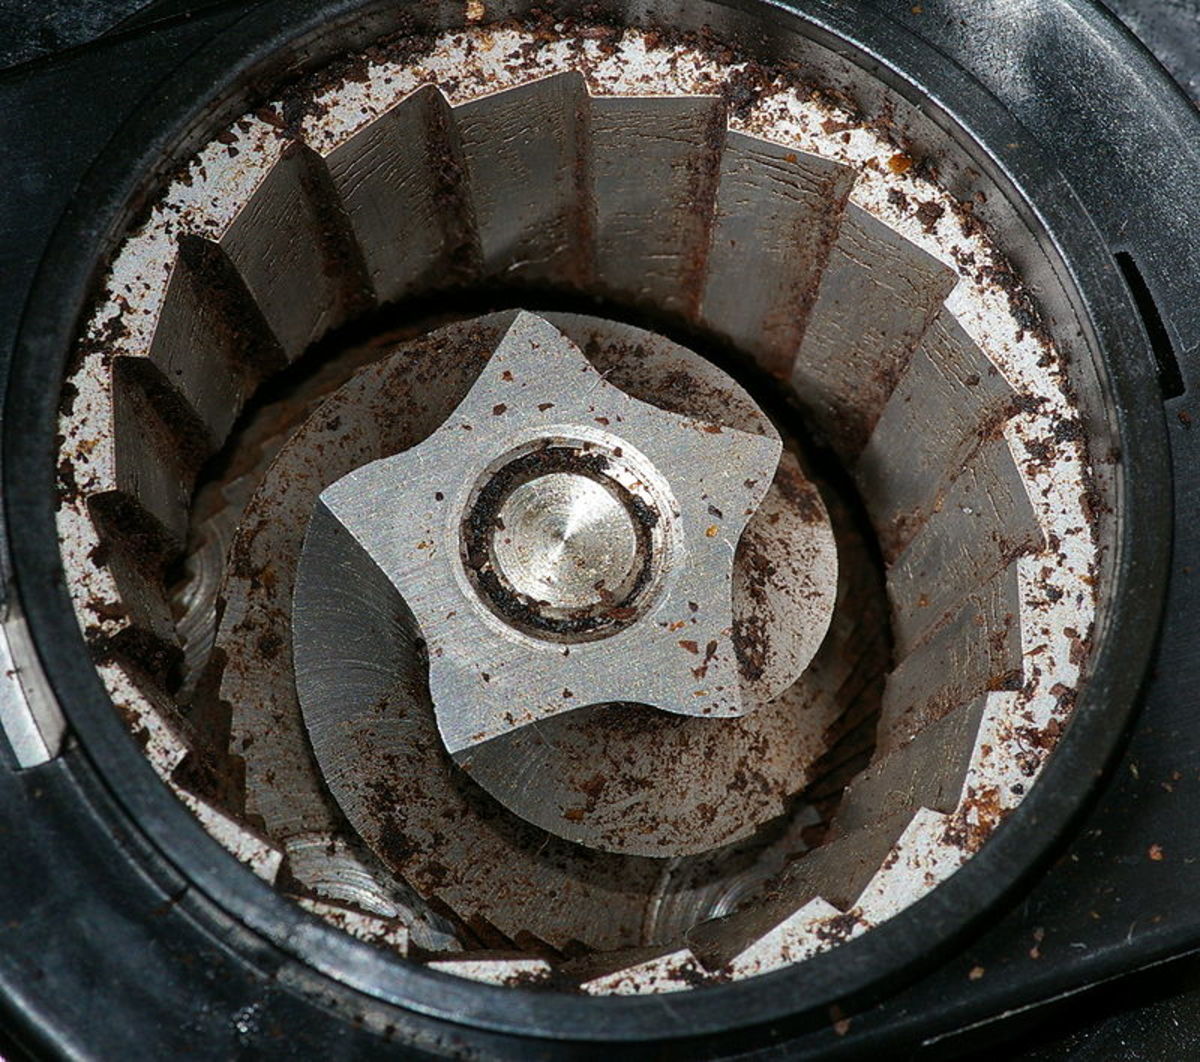 A burr grinder interior.  The bean hopper, which sits on top, has been removed in order to see inside.  The coffee beans are crushed and torn, rather than chopped, meaning that very little heat is generated. 